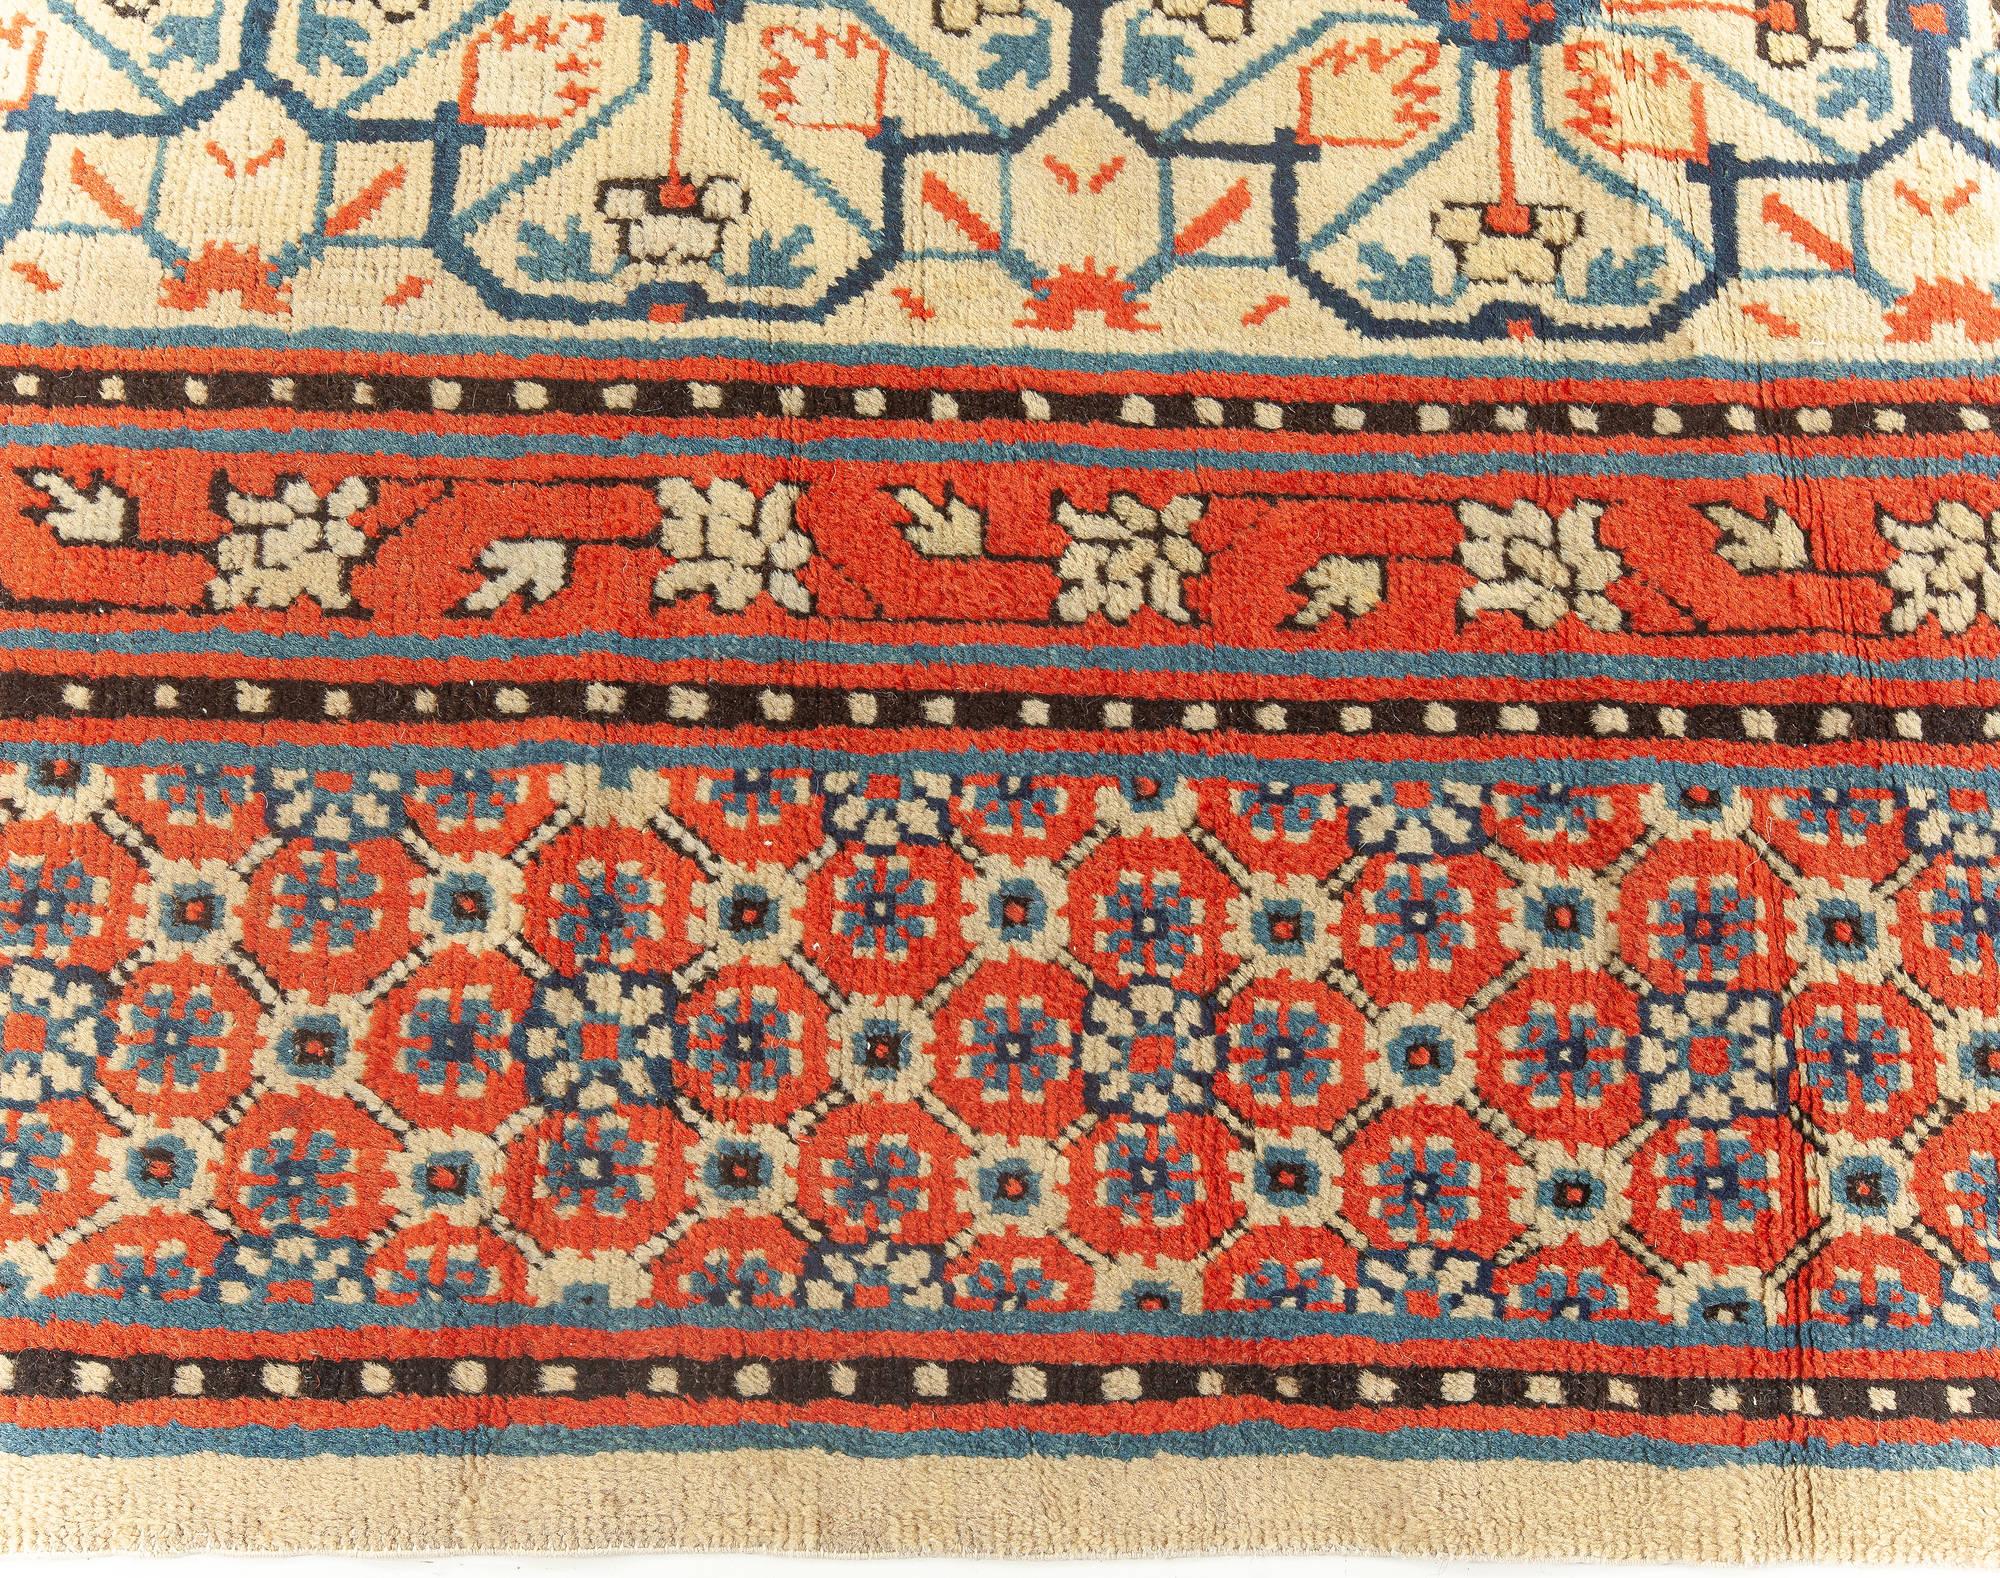 Early 20th Century Samarkand 'Khotan' Handmade Rug In Good Condition For Sale In New York, NY